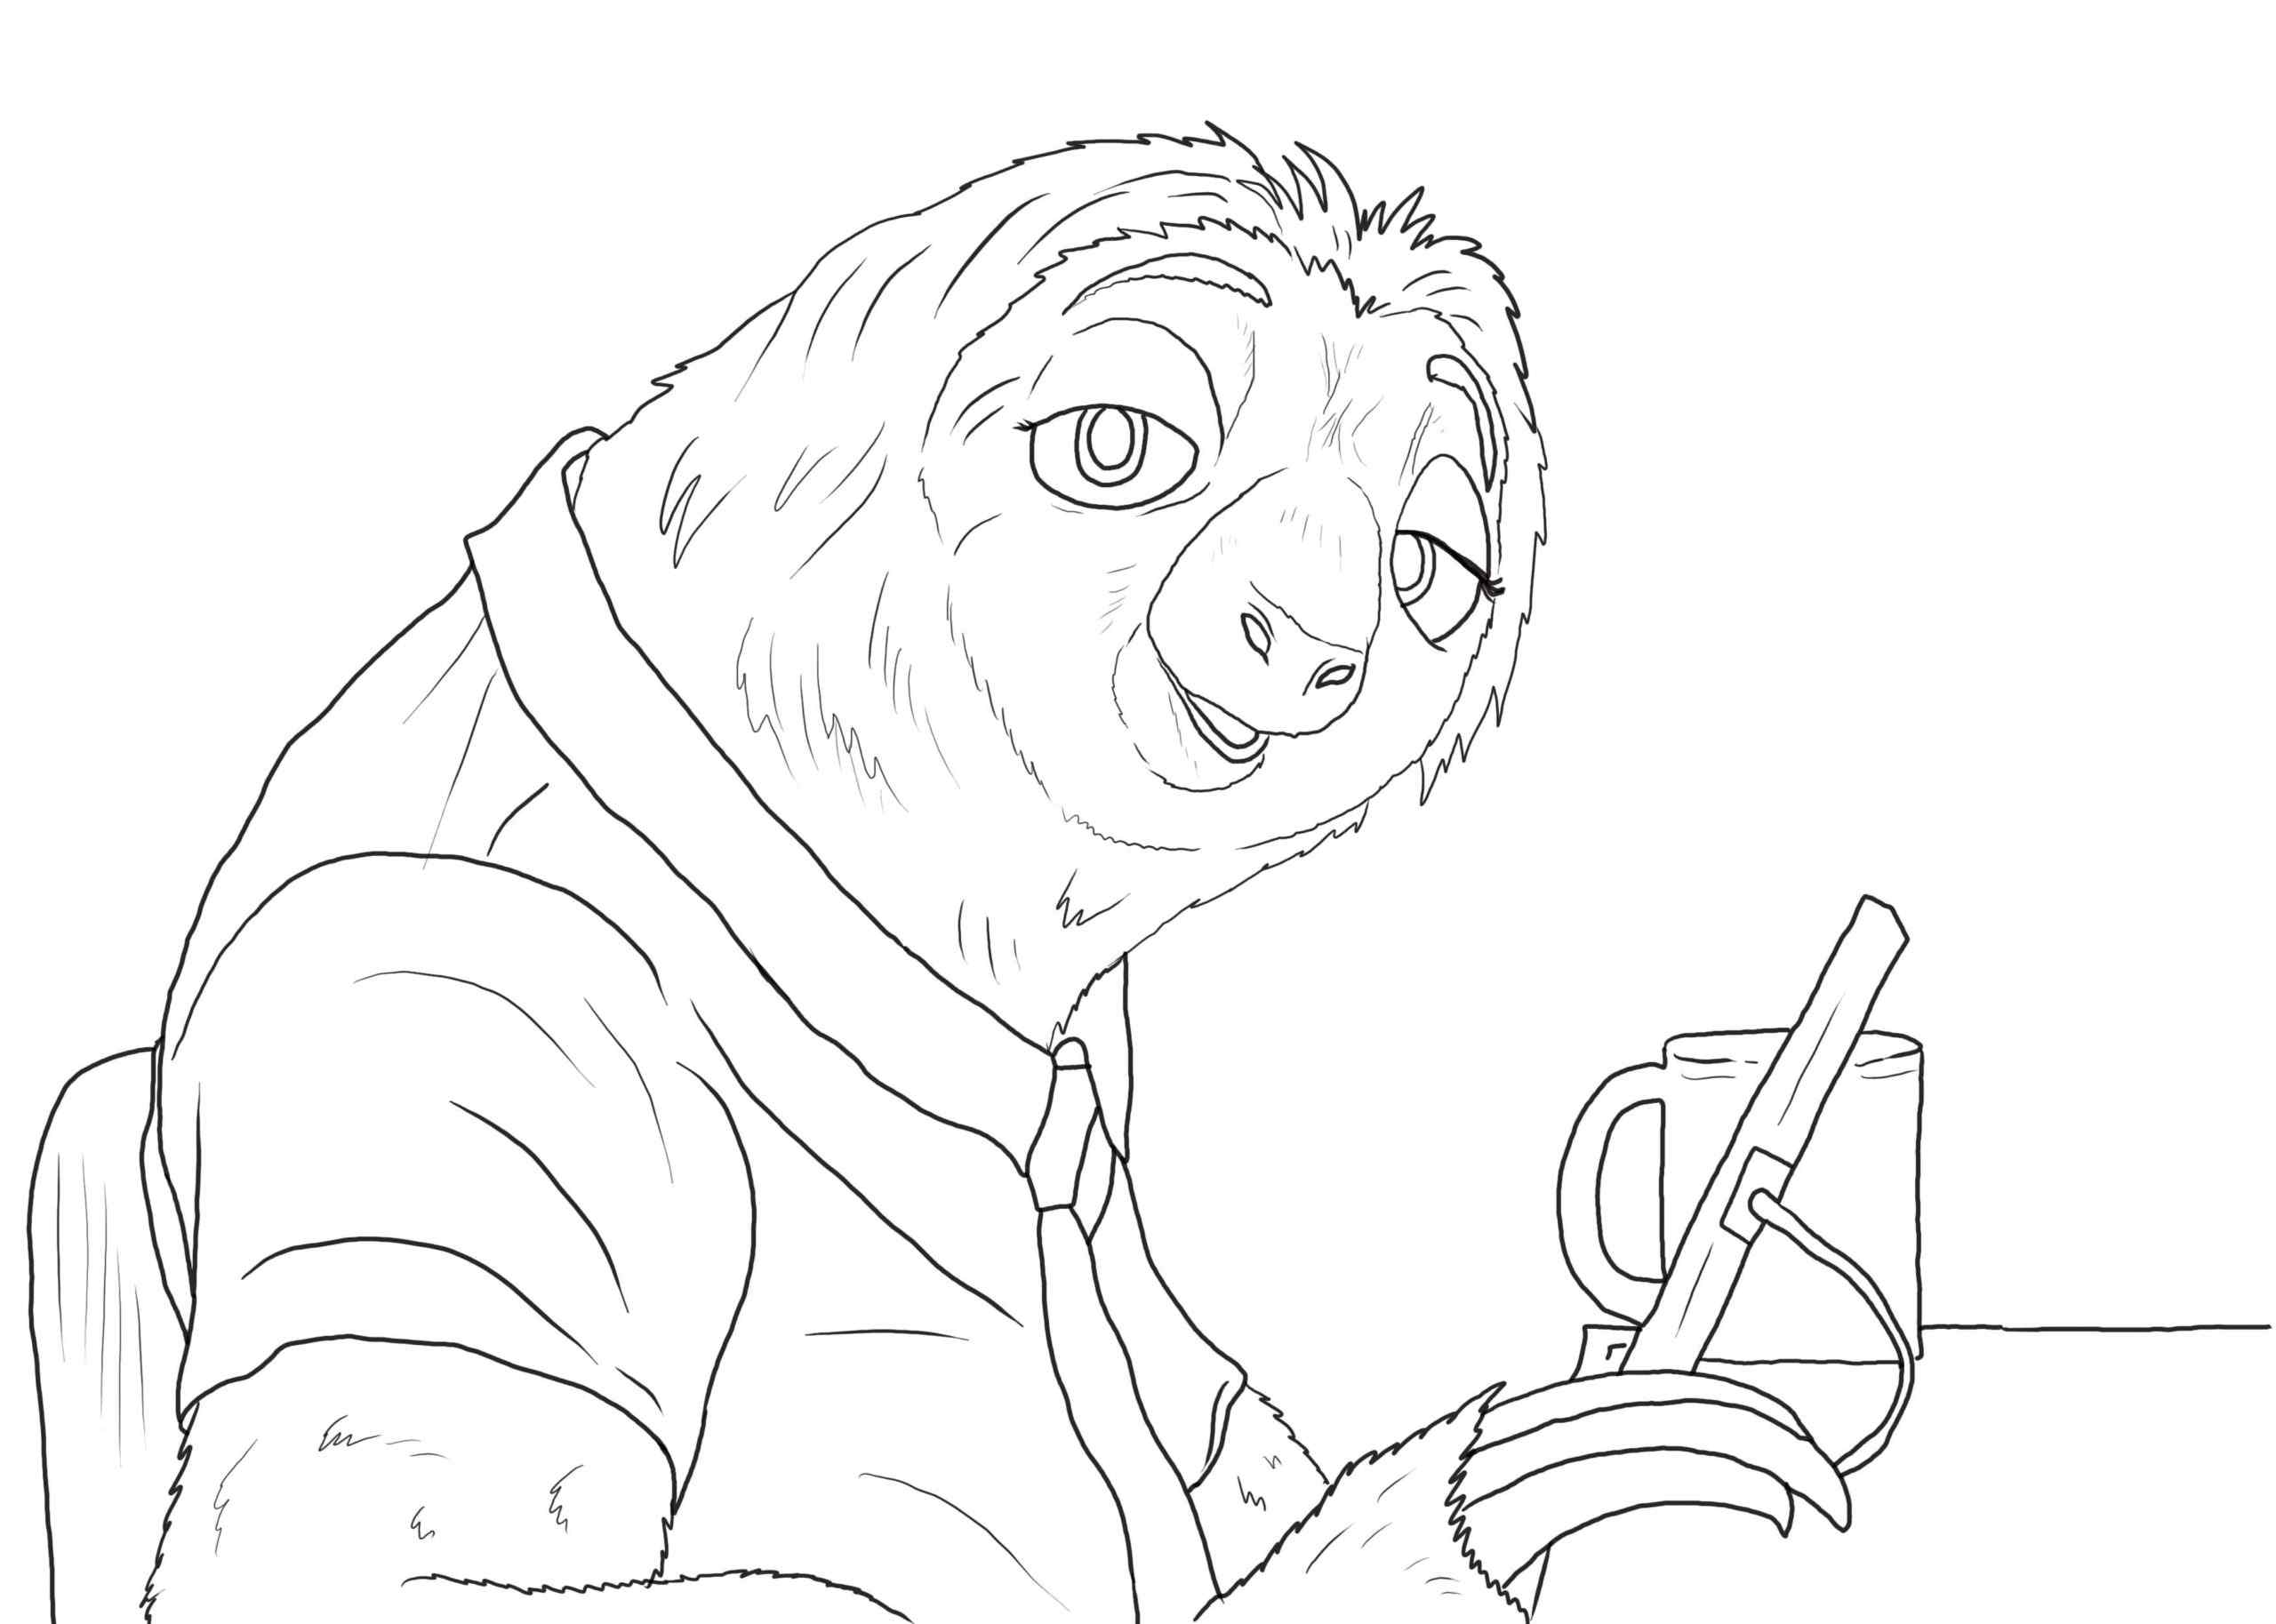 Clever Sloth From Zootopia